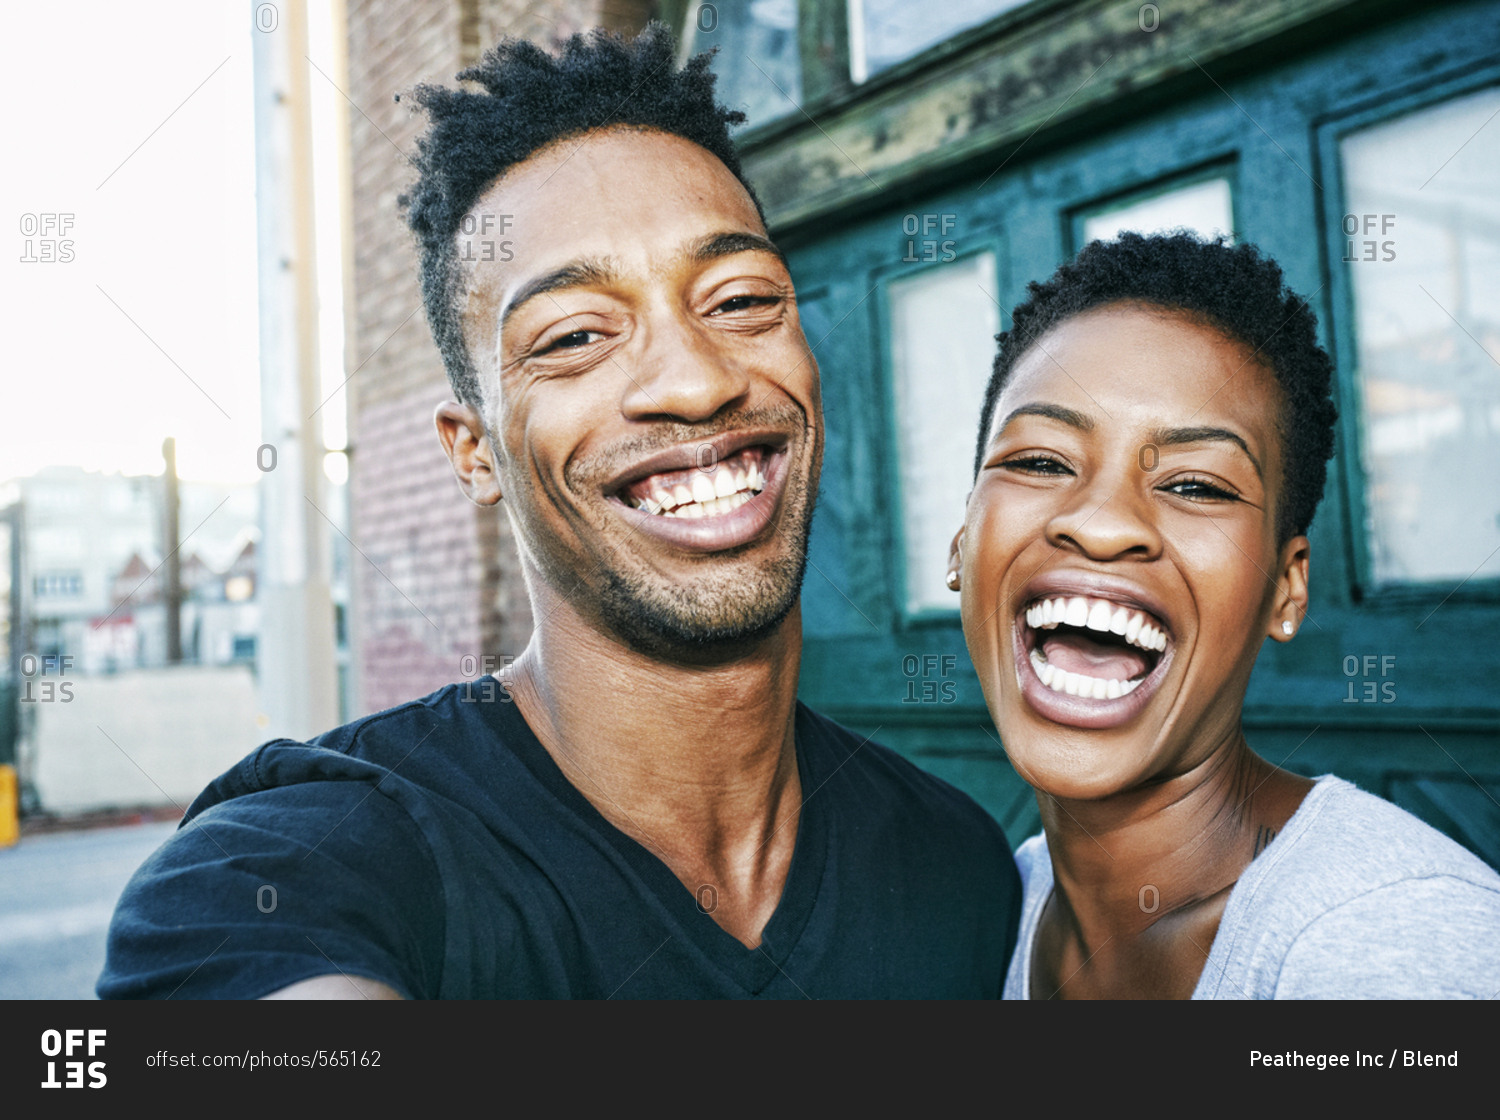 Portrait of smiling Black couple in city